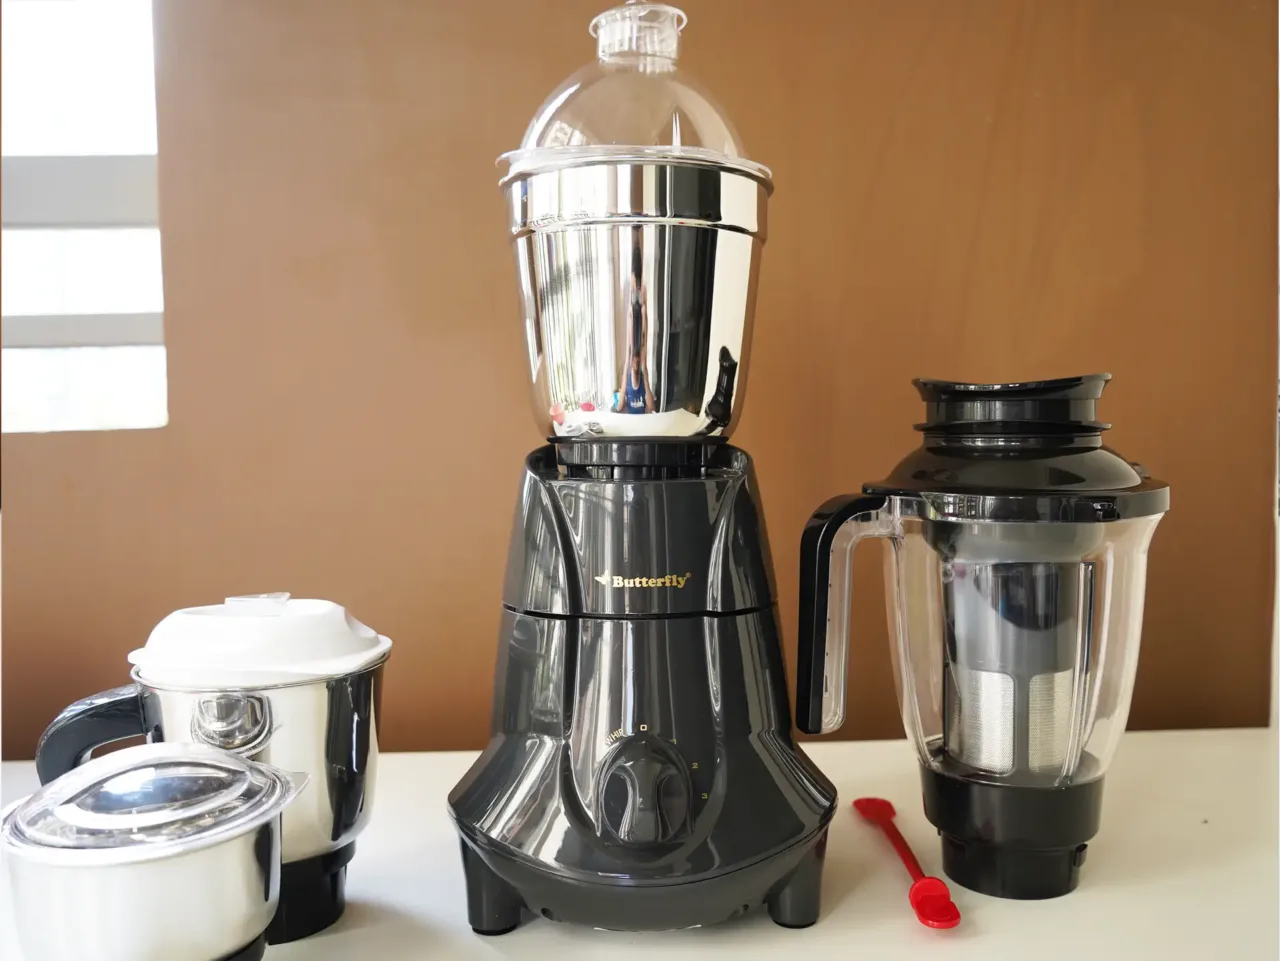 Butterfly Jet Elite Mixer Grinder review